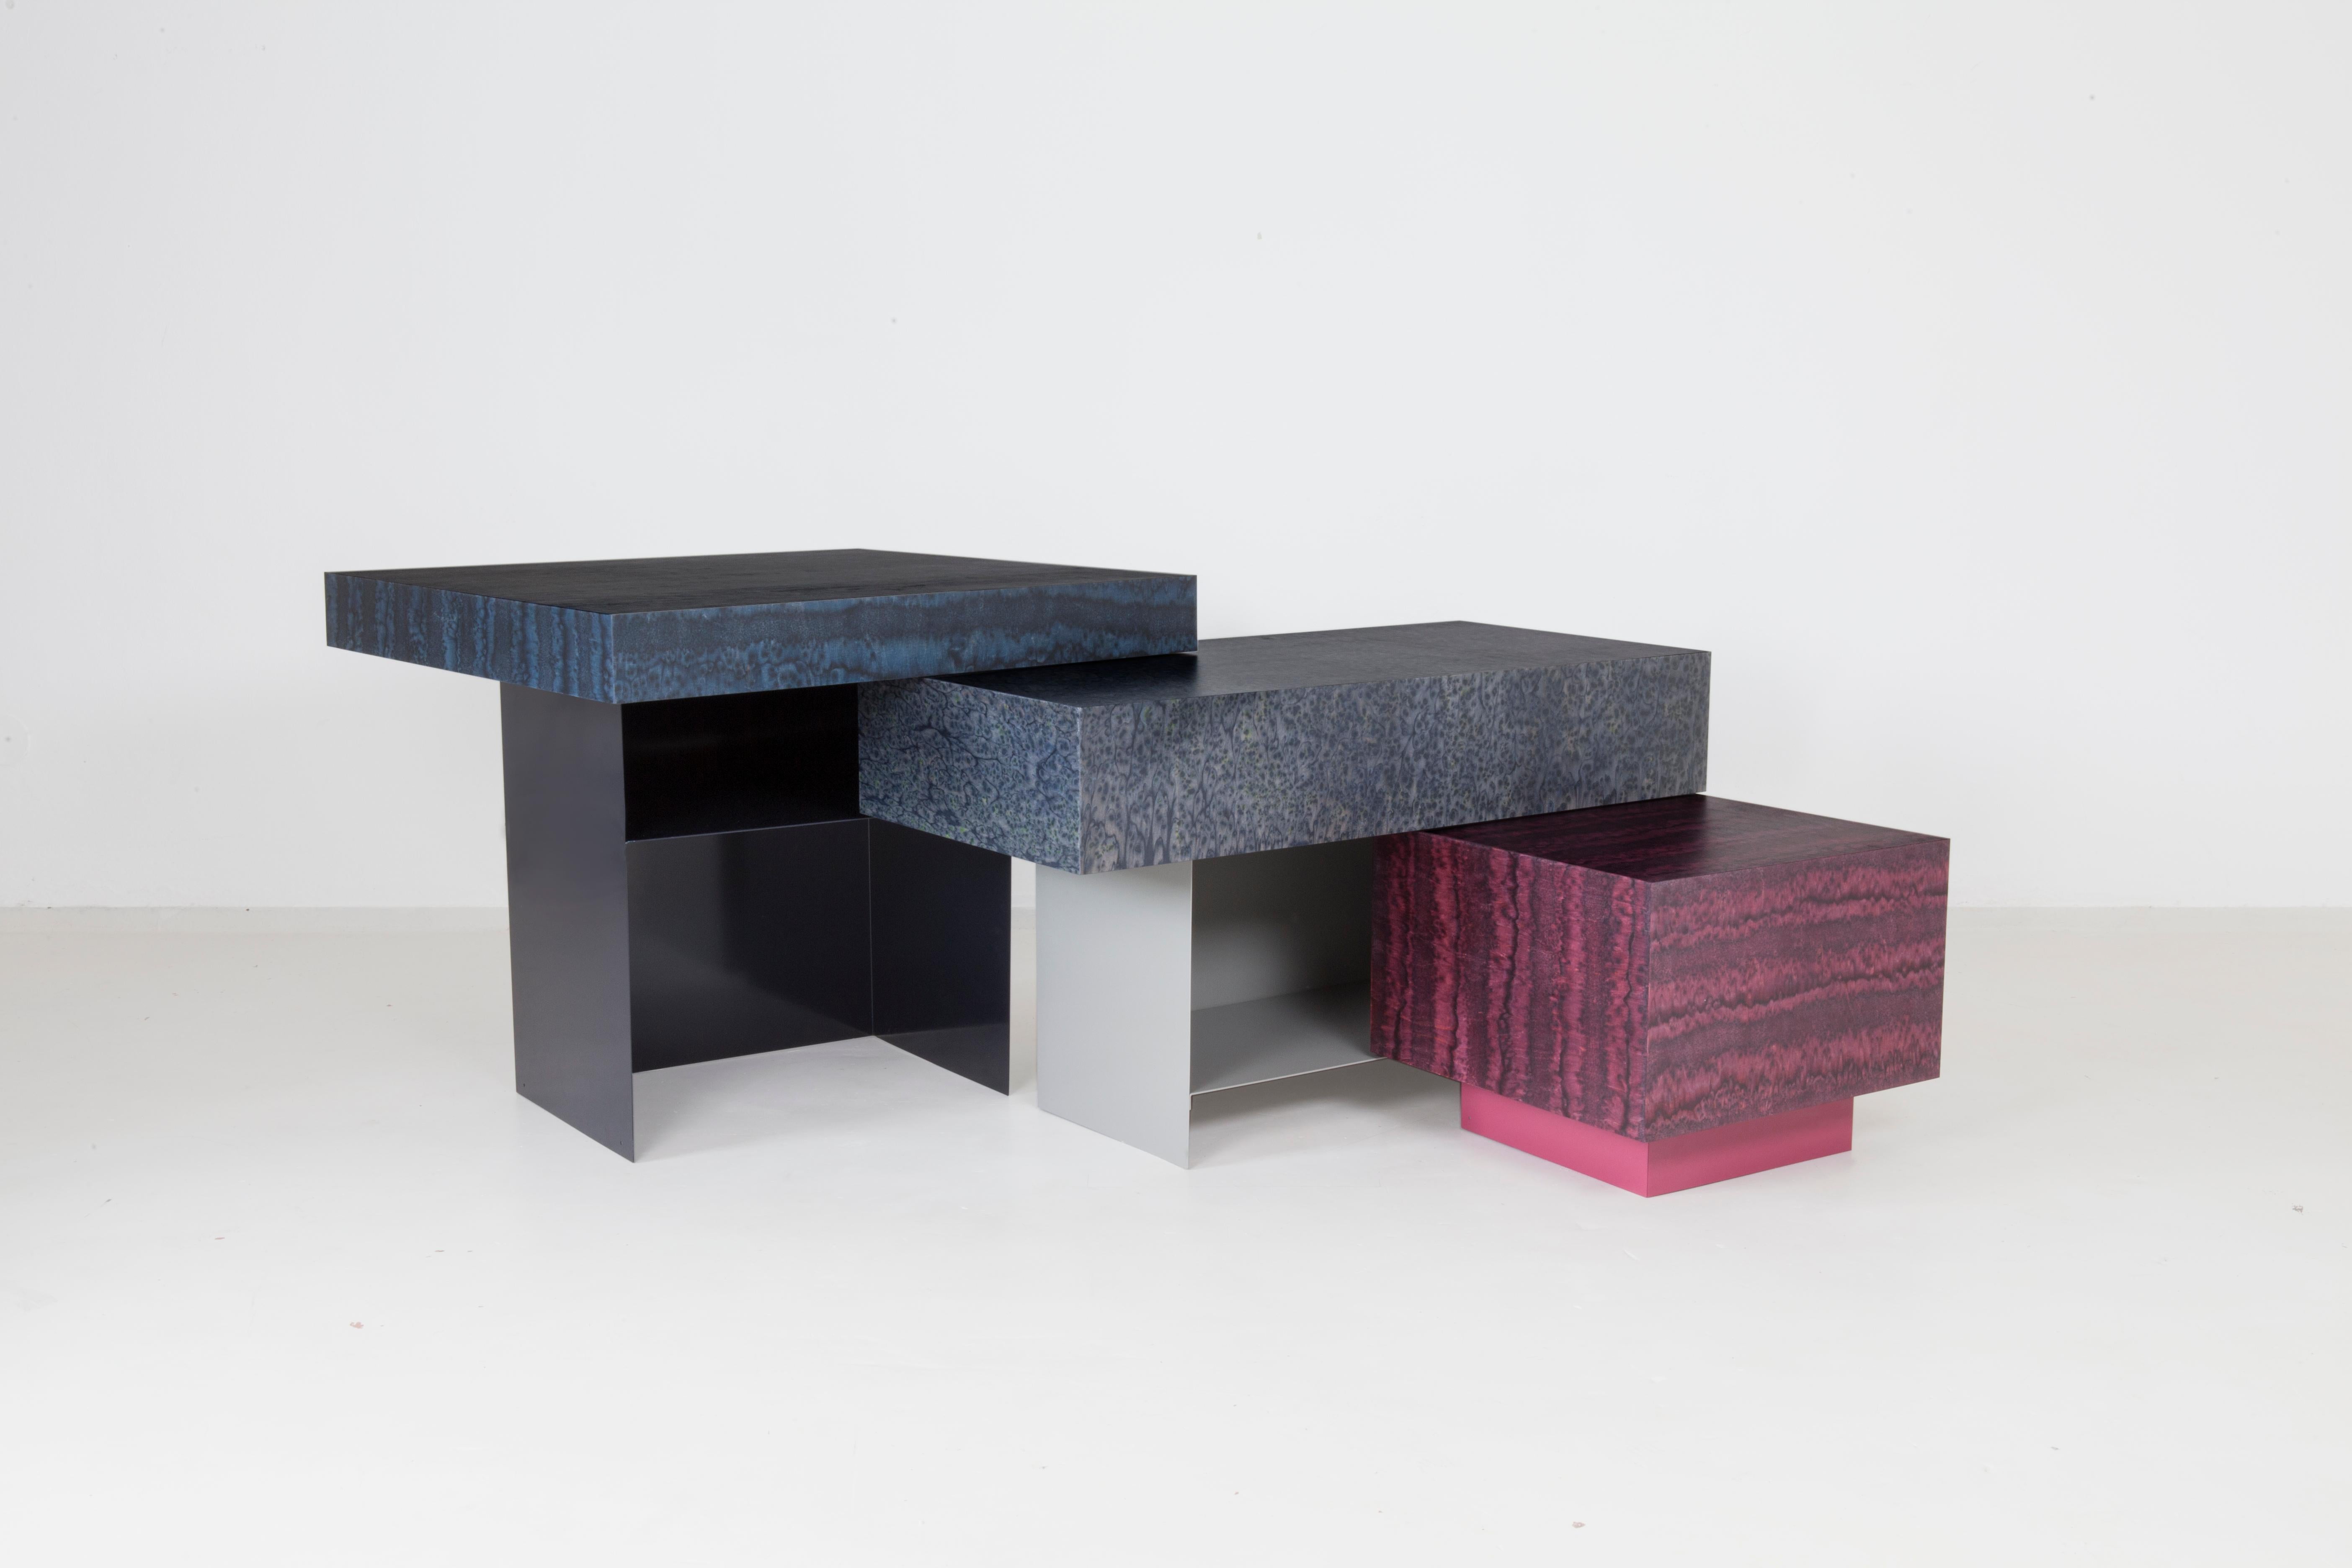 In the role of soloists they operate in a spectrum between coffee table, sideboard, occasional workplace and by their spotted pattern, they are an eye-catching centerpiece for the living environment. 

The surface finish OSIS is an innovation